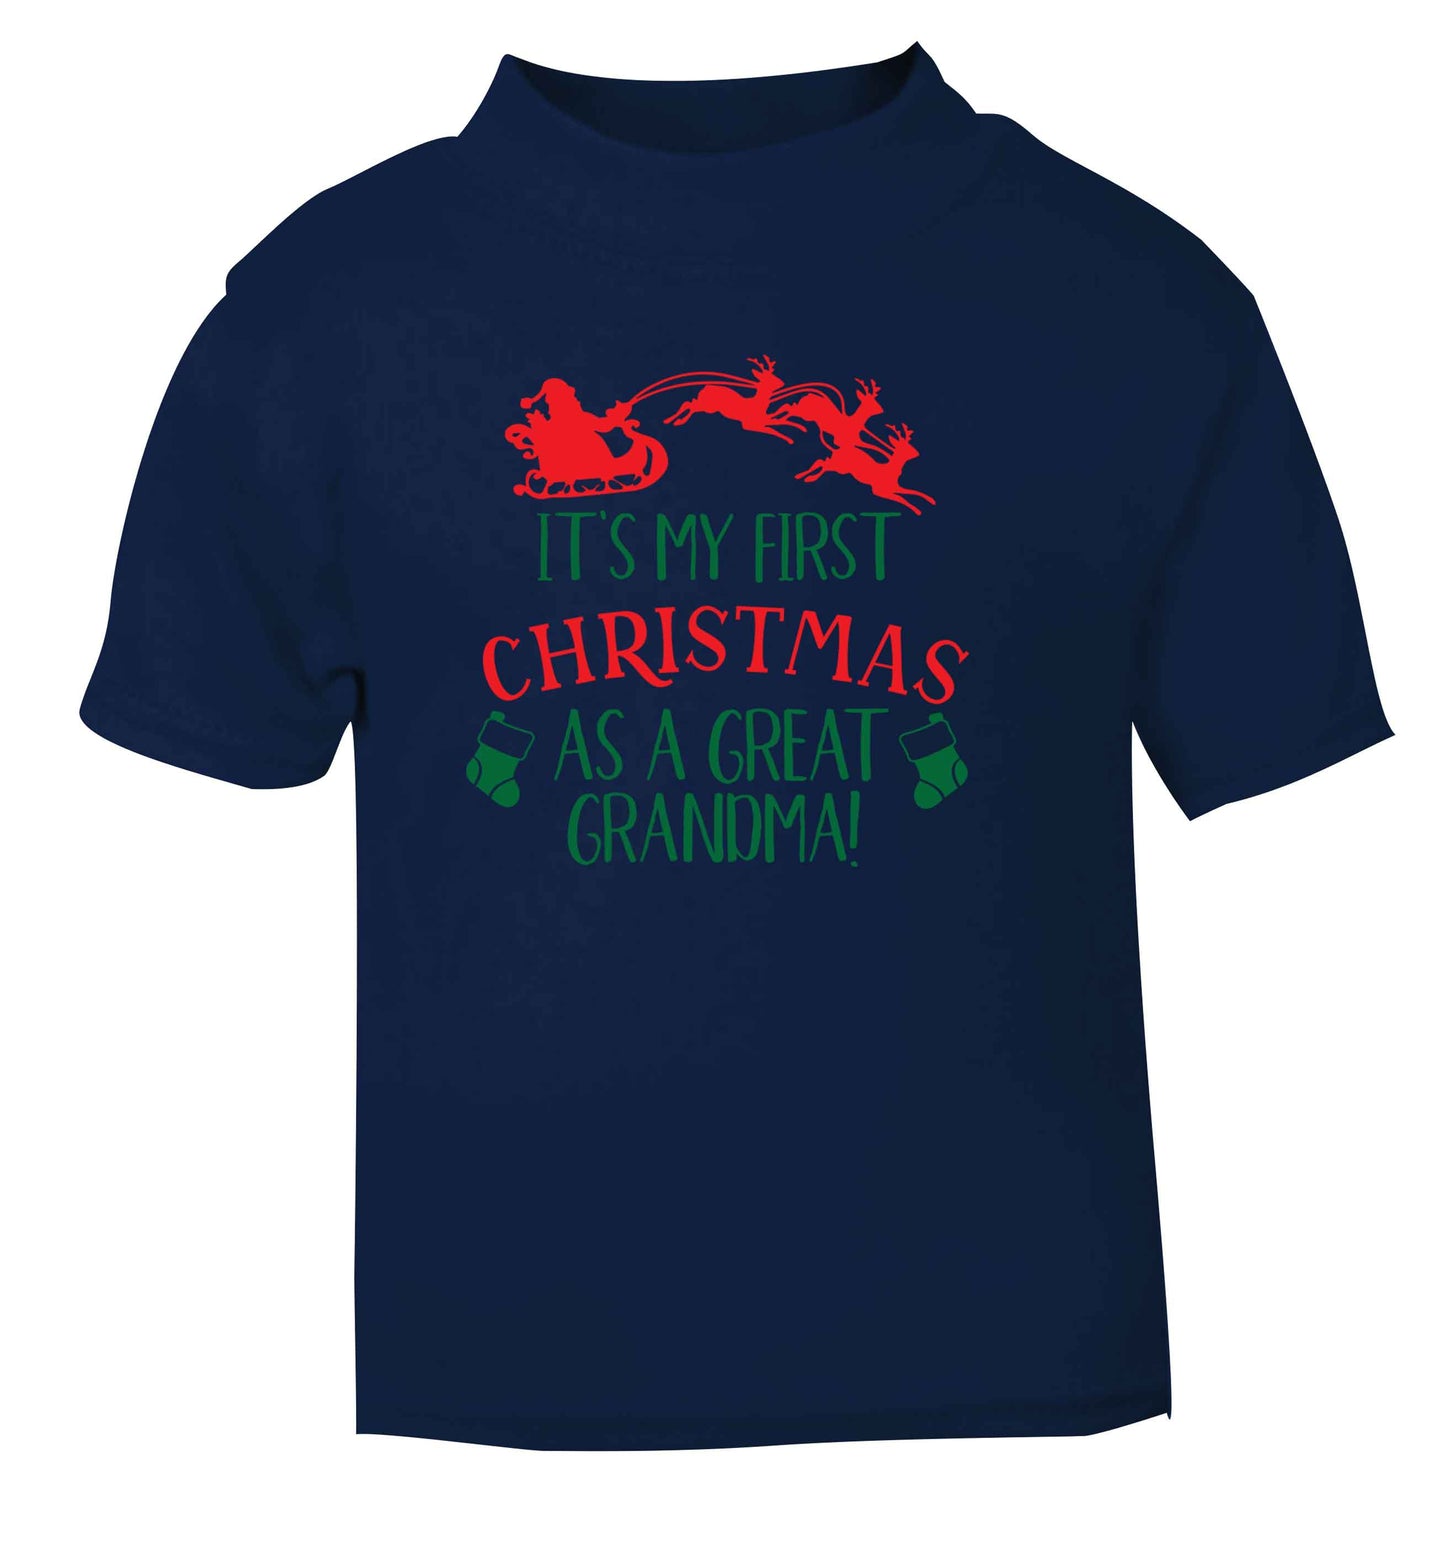 It's my first Christmas as a great grandma! navy Baby Toddler Tshirt 2 Years